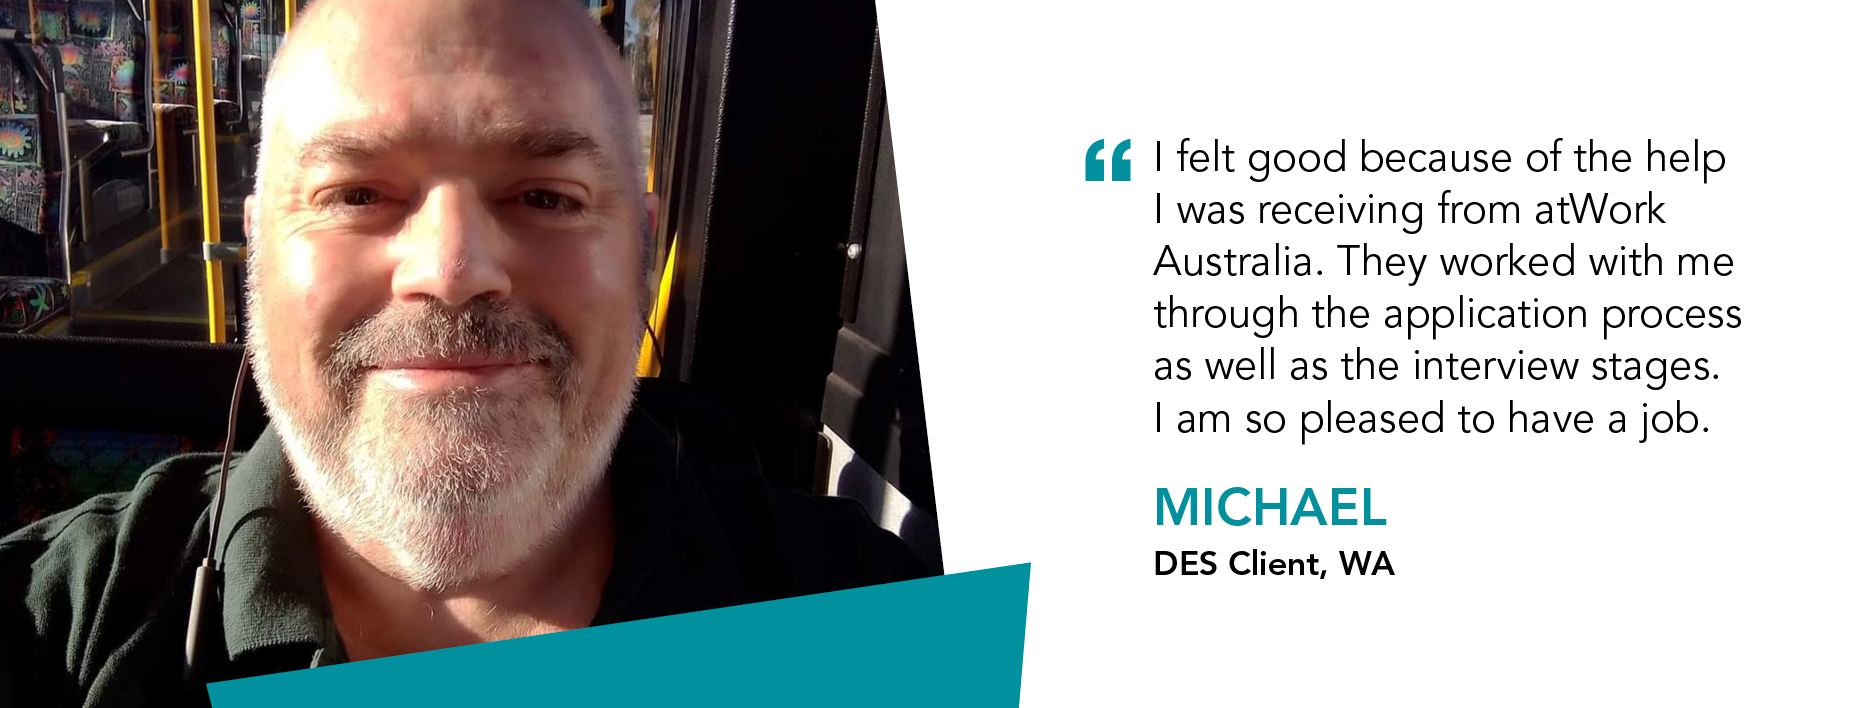 "I felt good because of the help I was receiving from atWork Australia. They worked with me through the application process as well as the interview stages. I am so pleased to have a job." Michael, DES Client, Western Australia